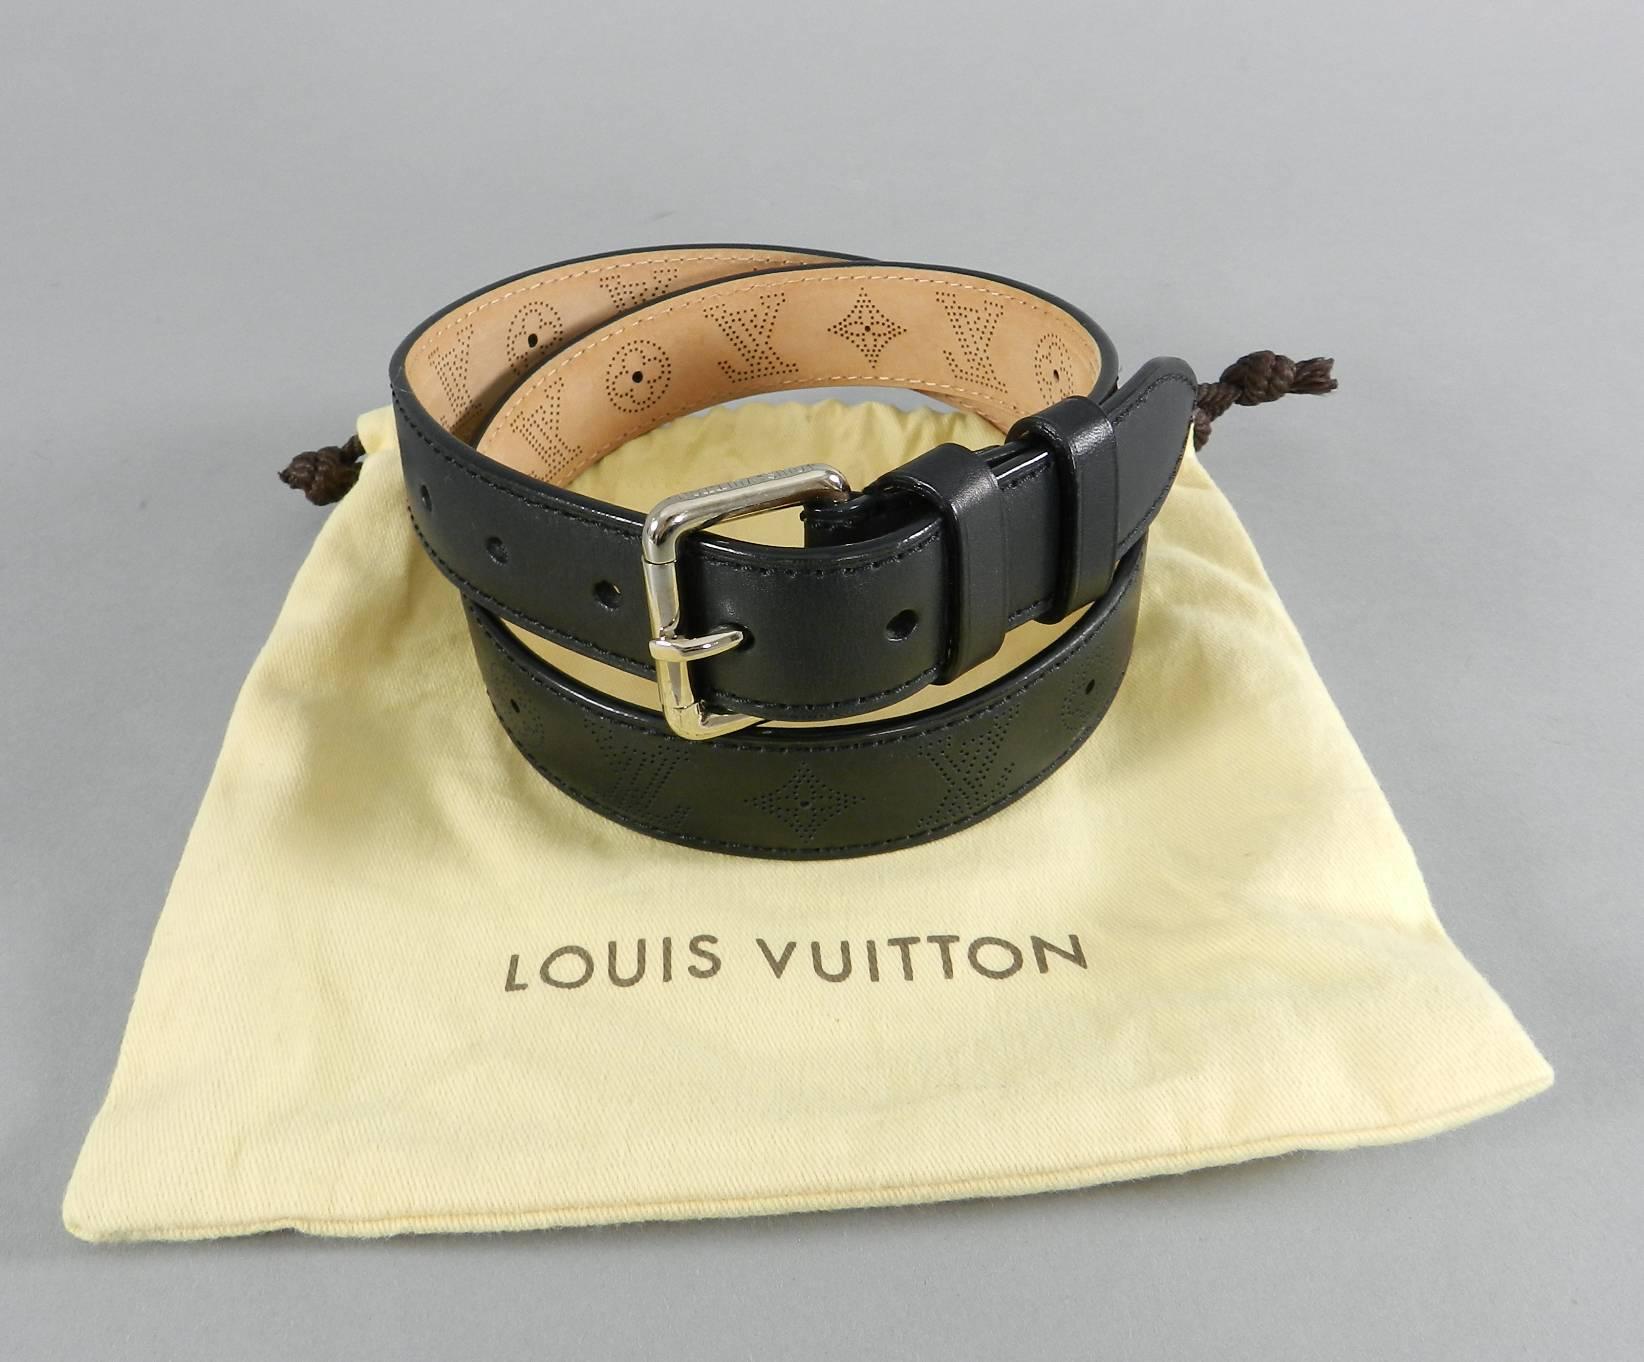 Louis Vuitton Black Perforated Monogram Mahina Leather Belt.  Holes every inch from 31-35".  Measures 1-1/8" wide. Excellent pre-owned condition. Looks to be worn only once. Includes duster.

We ship worldwide.